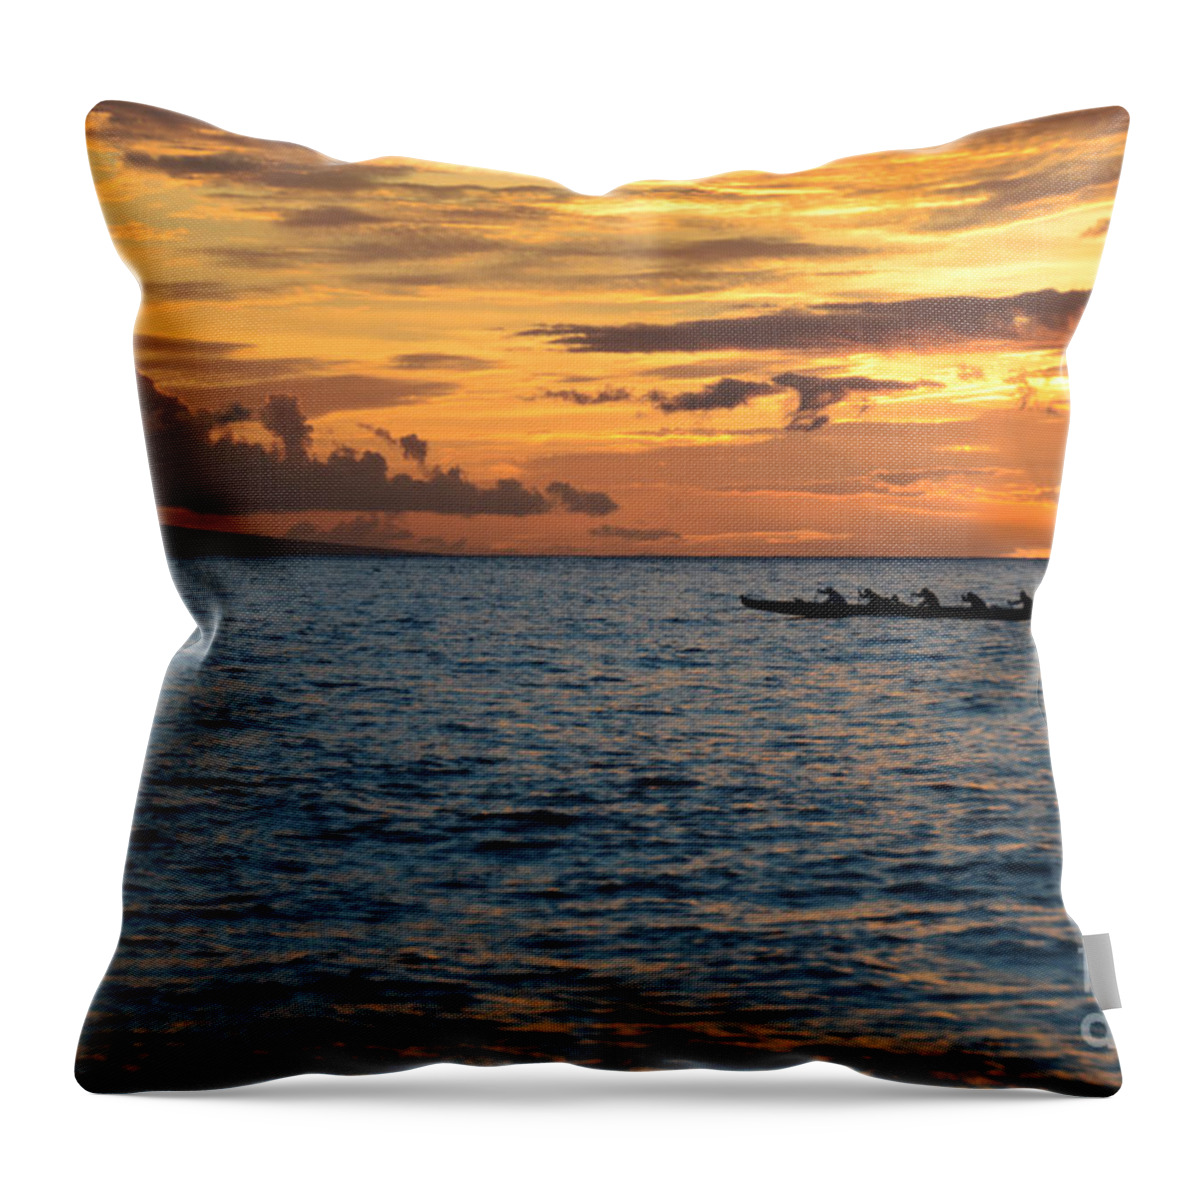 Photograph Throw Pillow featuring the photograph Outrigger Sunset #1 by Kelly Wade